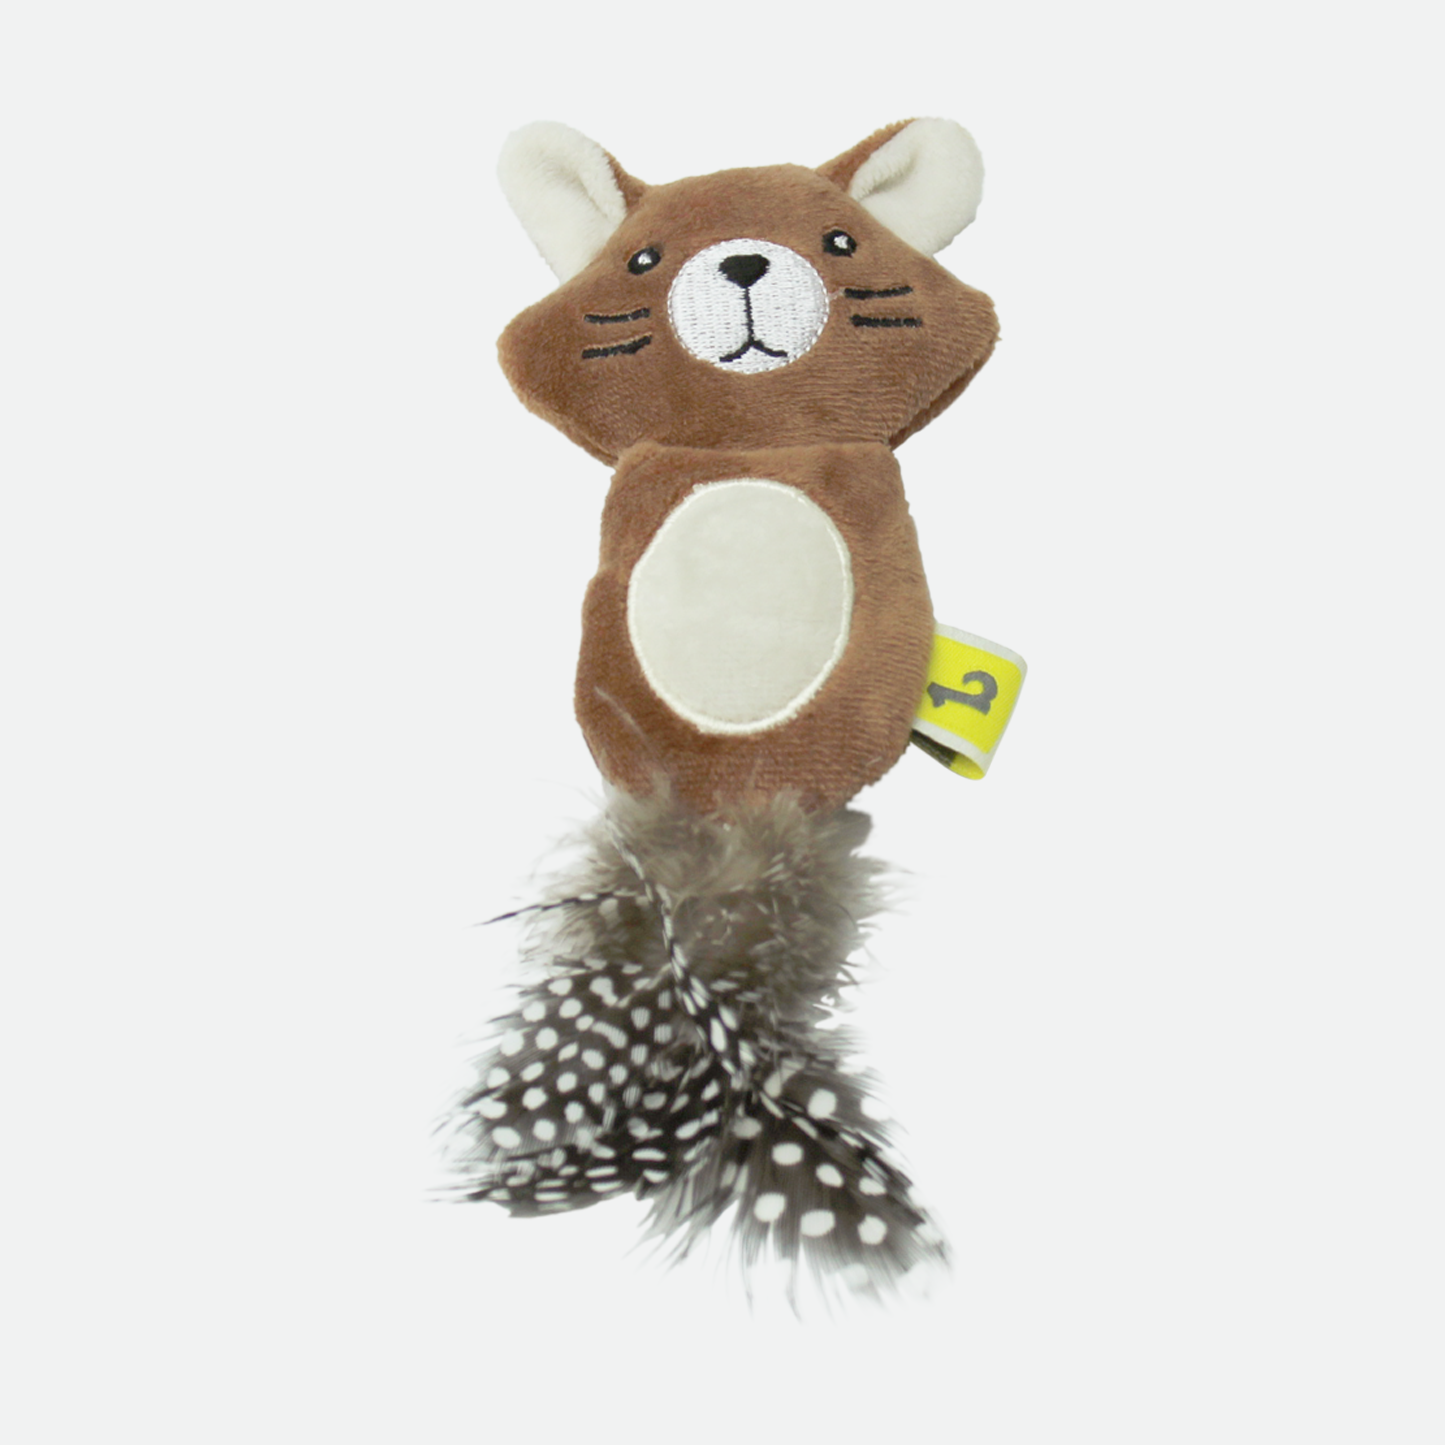 Plush toy for cat, chipmunk style